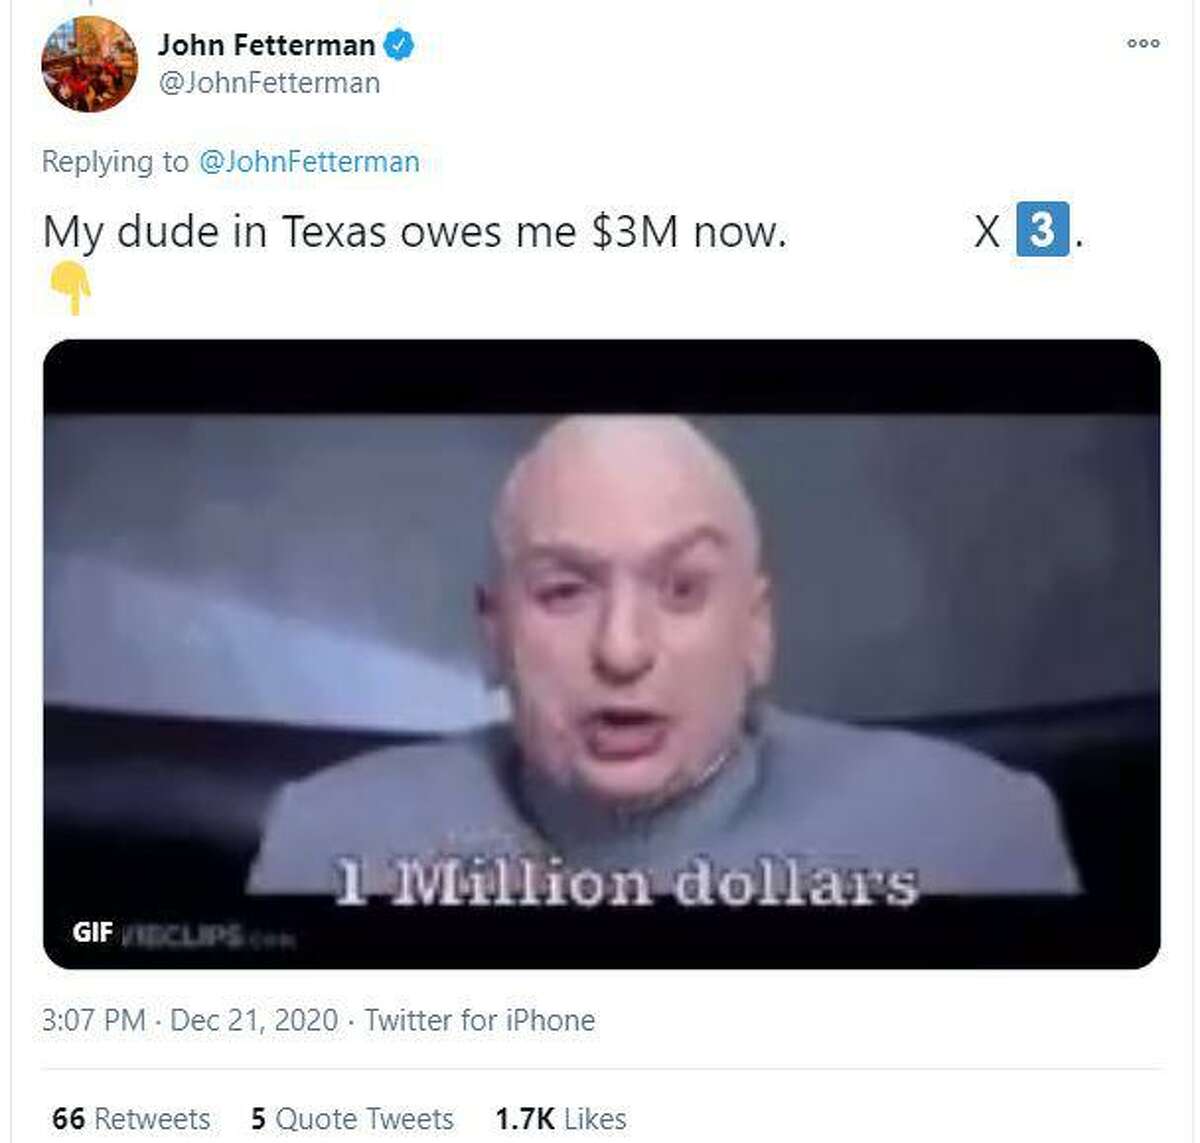 Democratic Lt. Gov. John Fetterman of Pennsylvania has been trolling his Republican counterpart in Texas for weeks to collect on the $1 million Patrick offered in November for evidence of fraud in the Nov. 3 election.